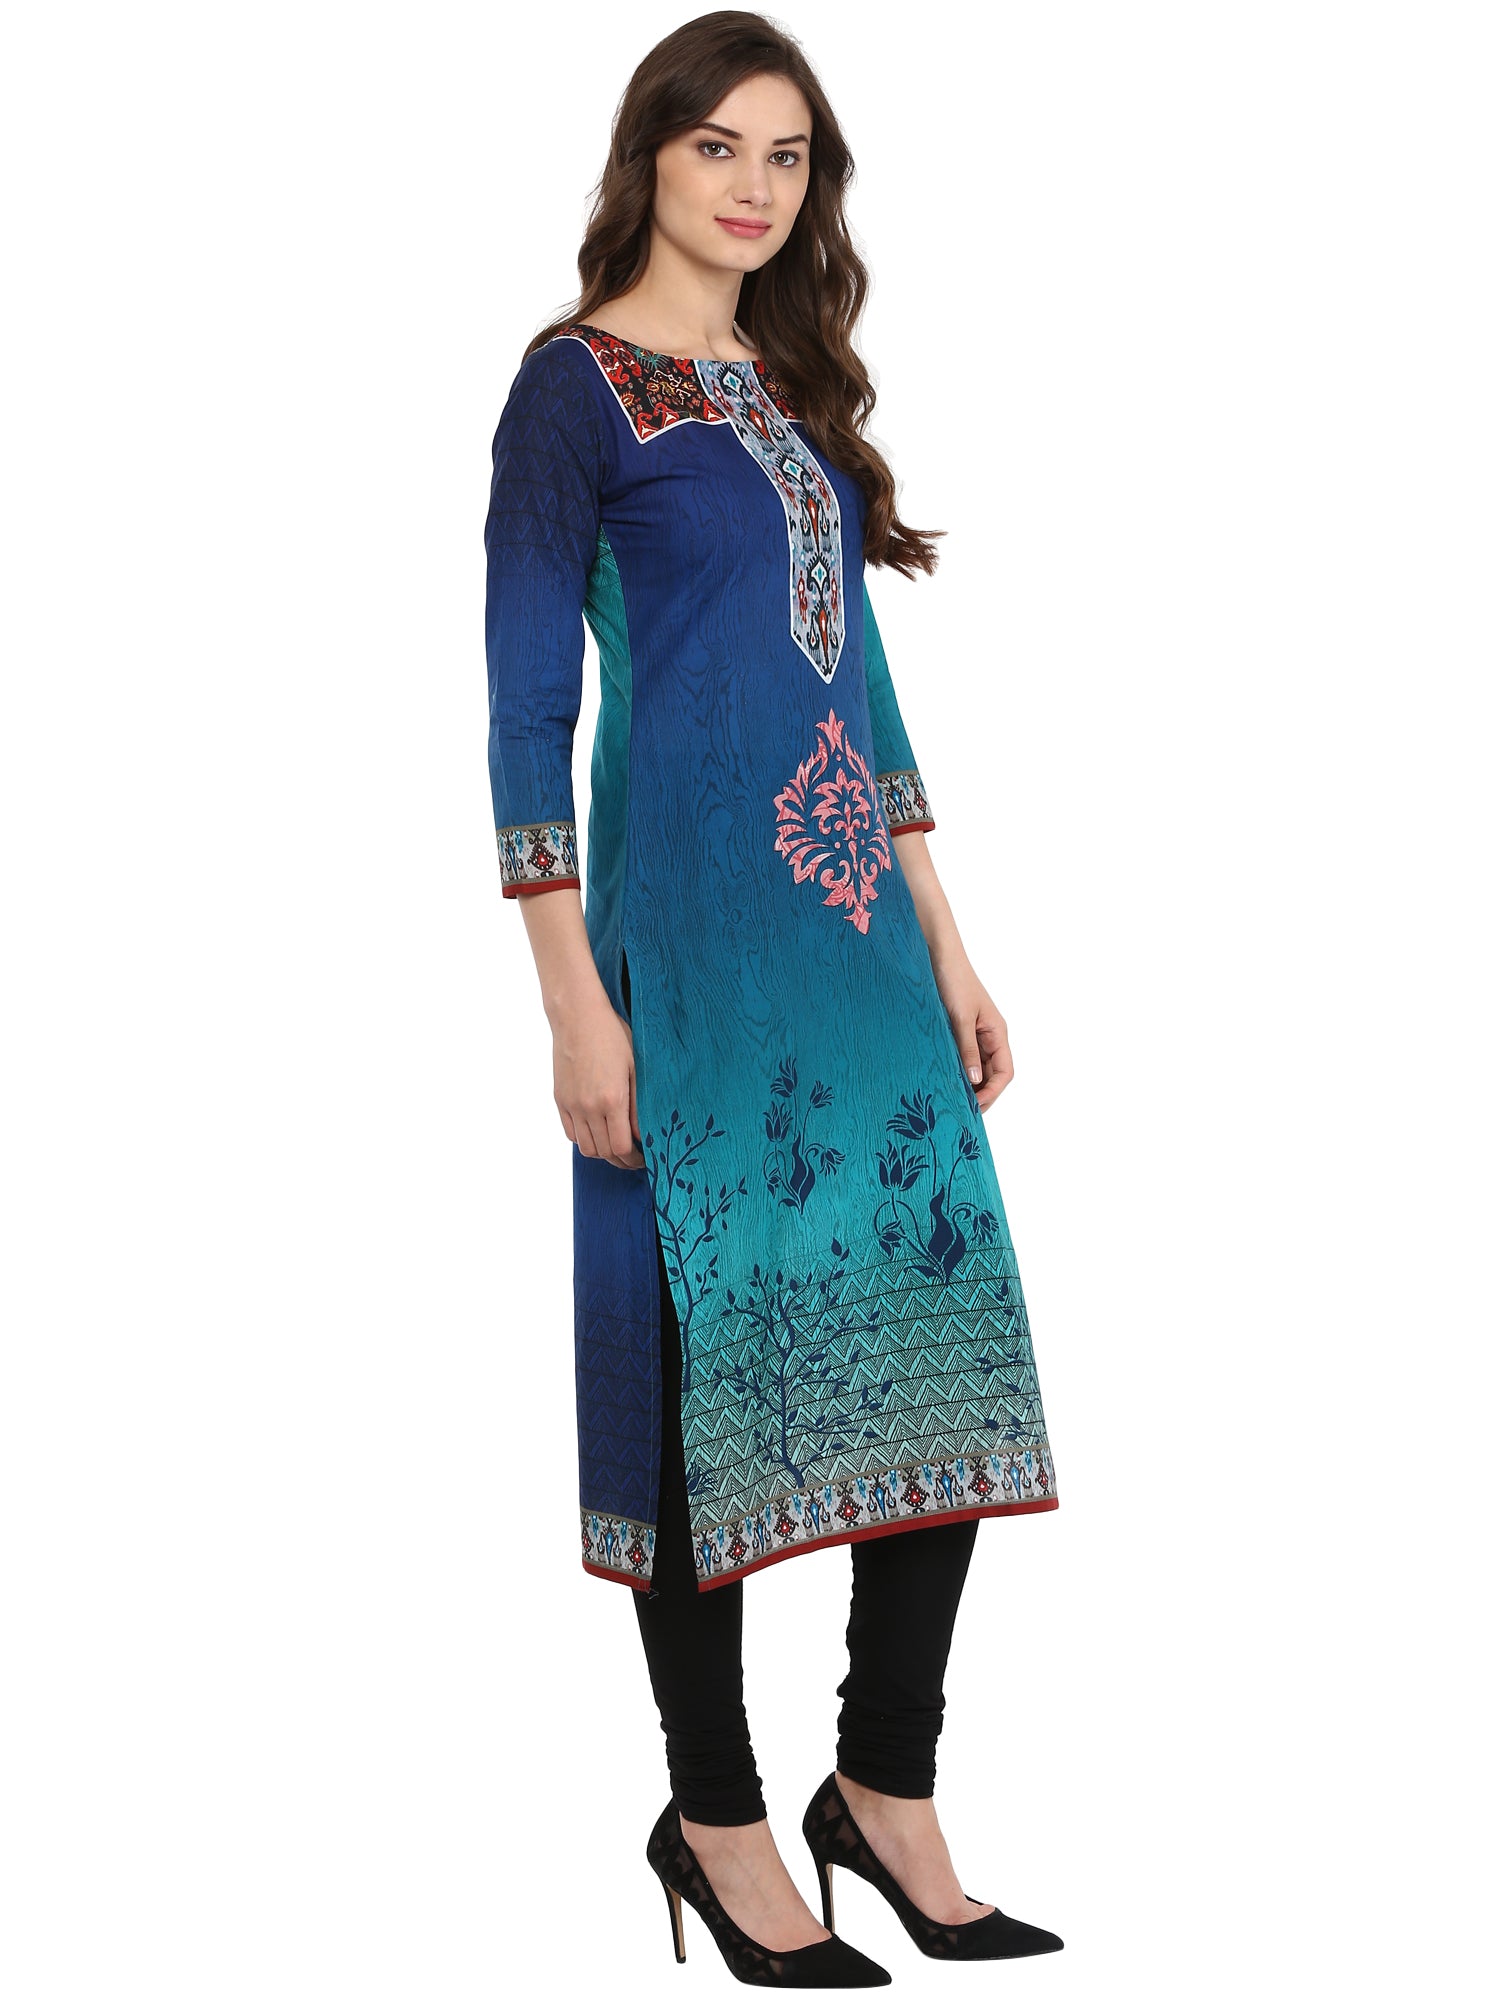 Women's Shades Of Blue Cotton Printed Only Kurti - Ahalyaa